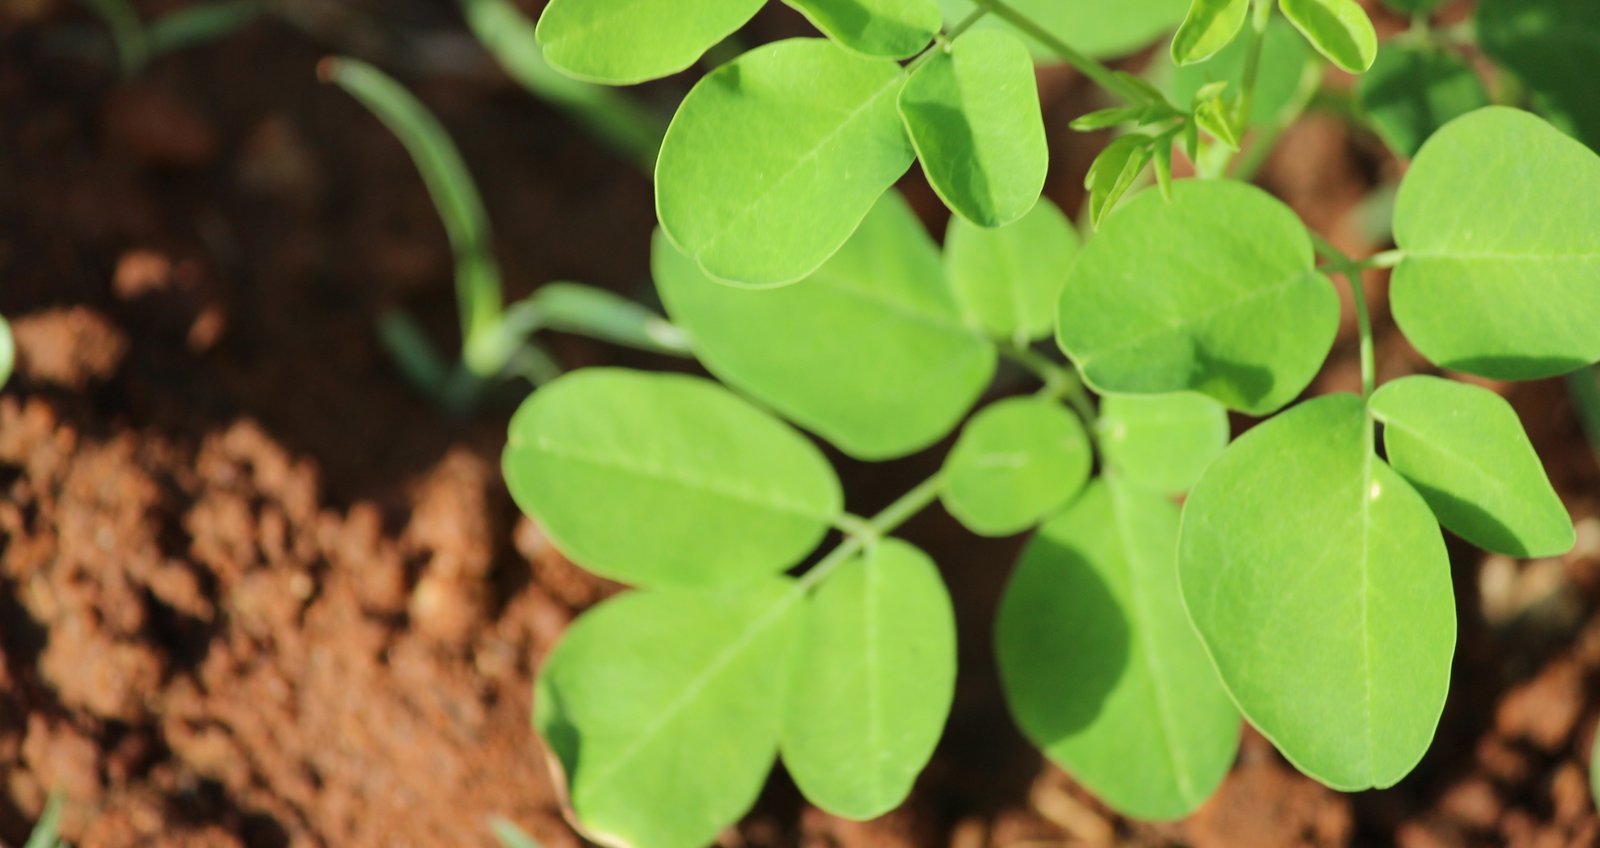 Moringa leaves grown under proper weather conditions in South India